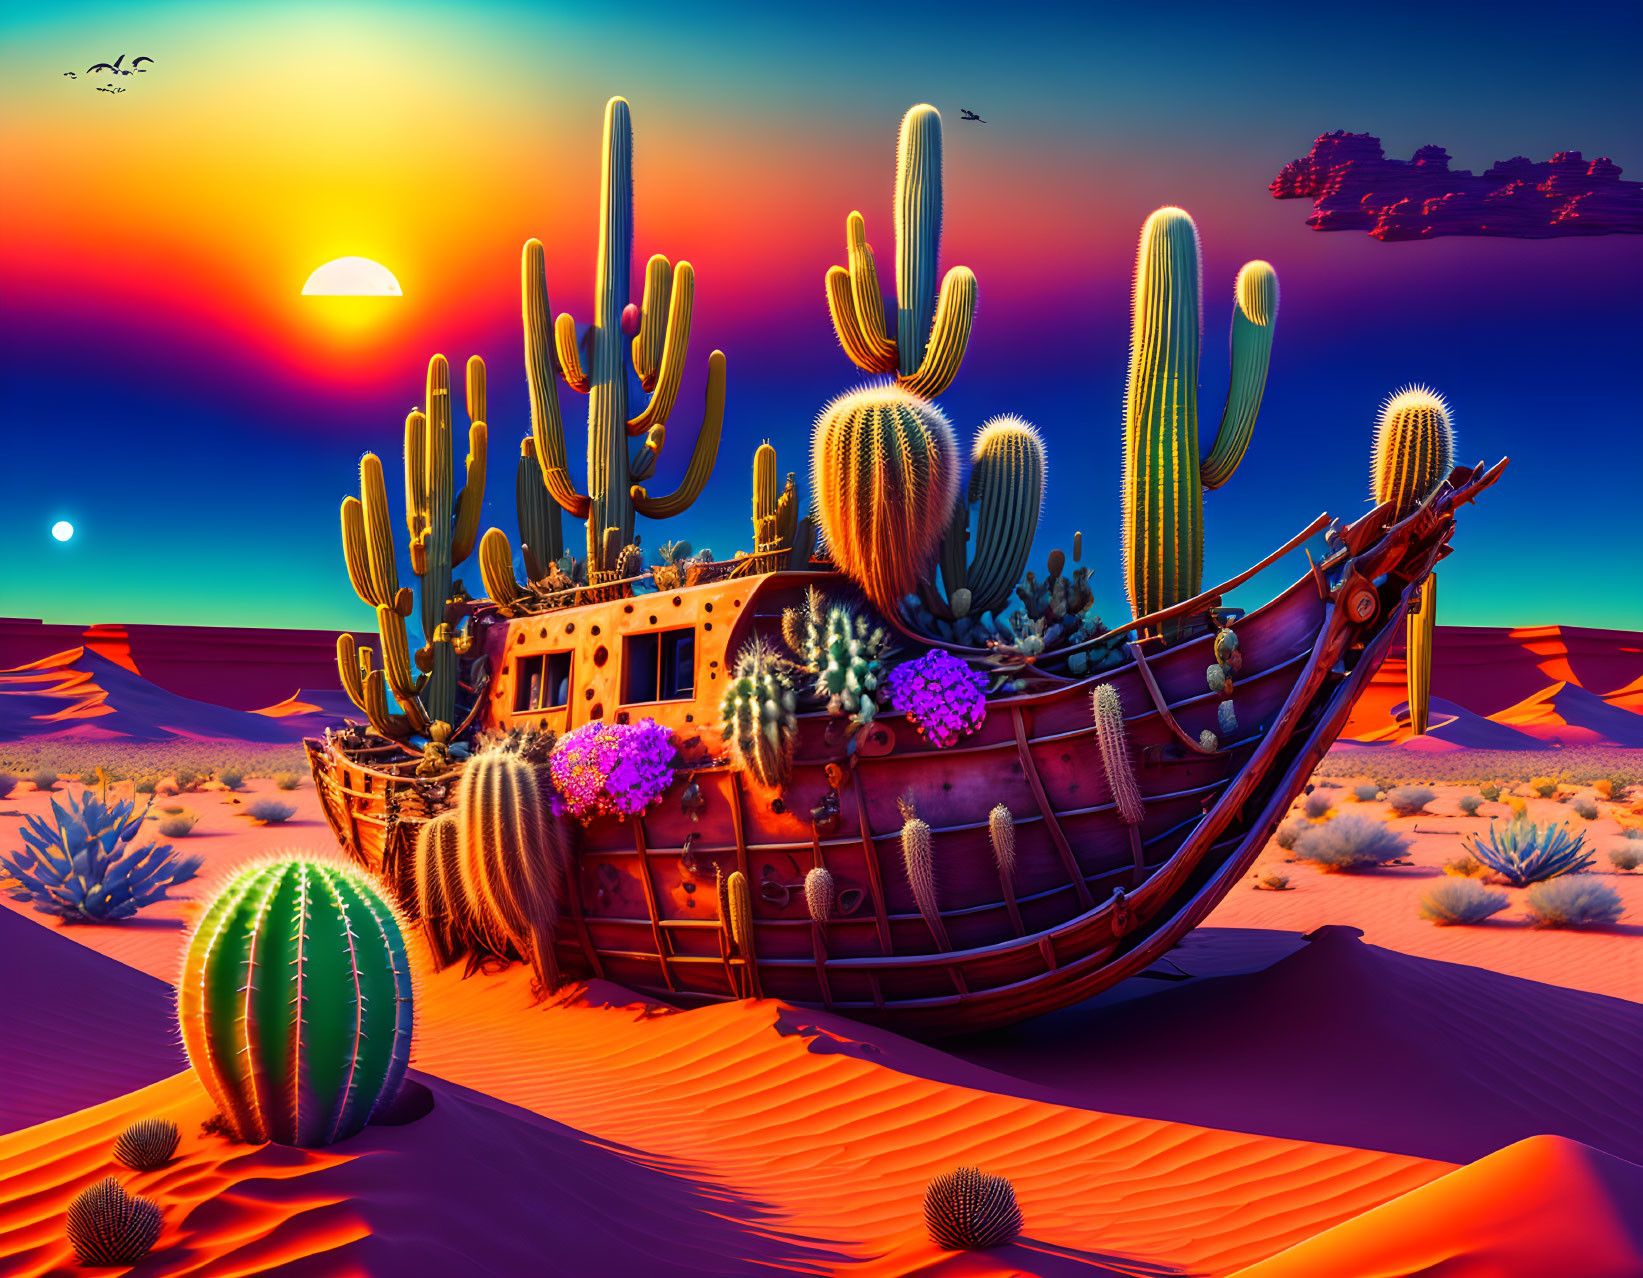 Shipwreck in desert with cacti under vibrant sunset and moon